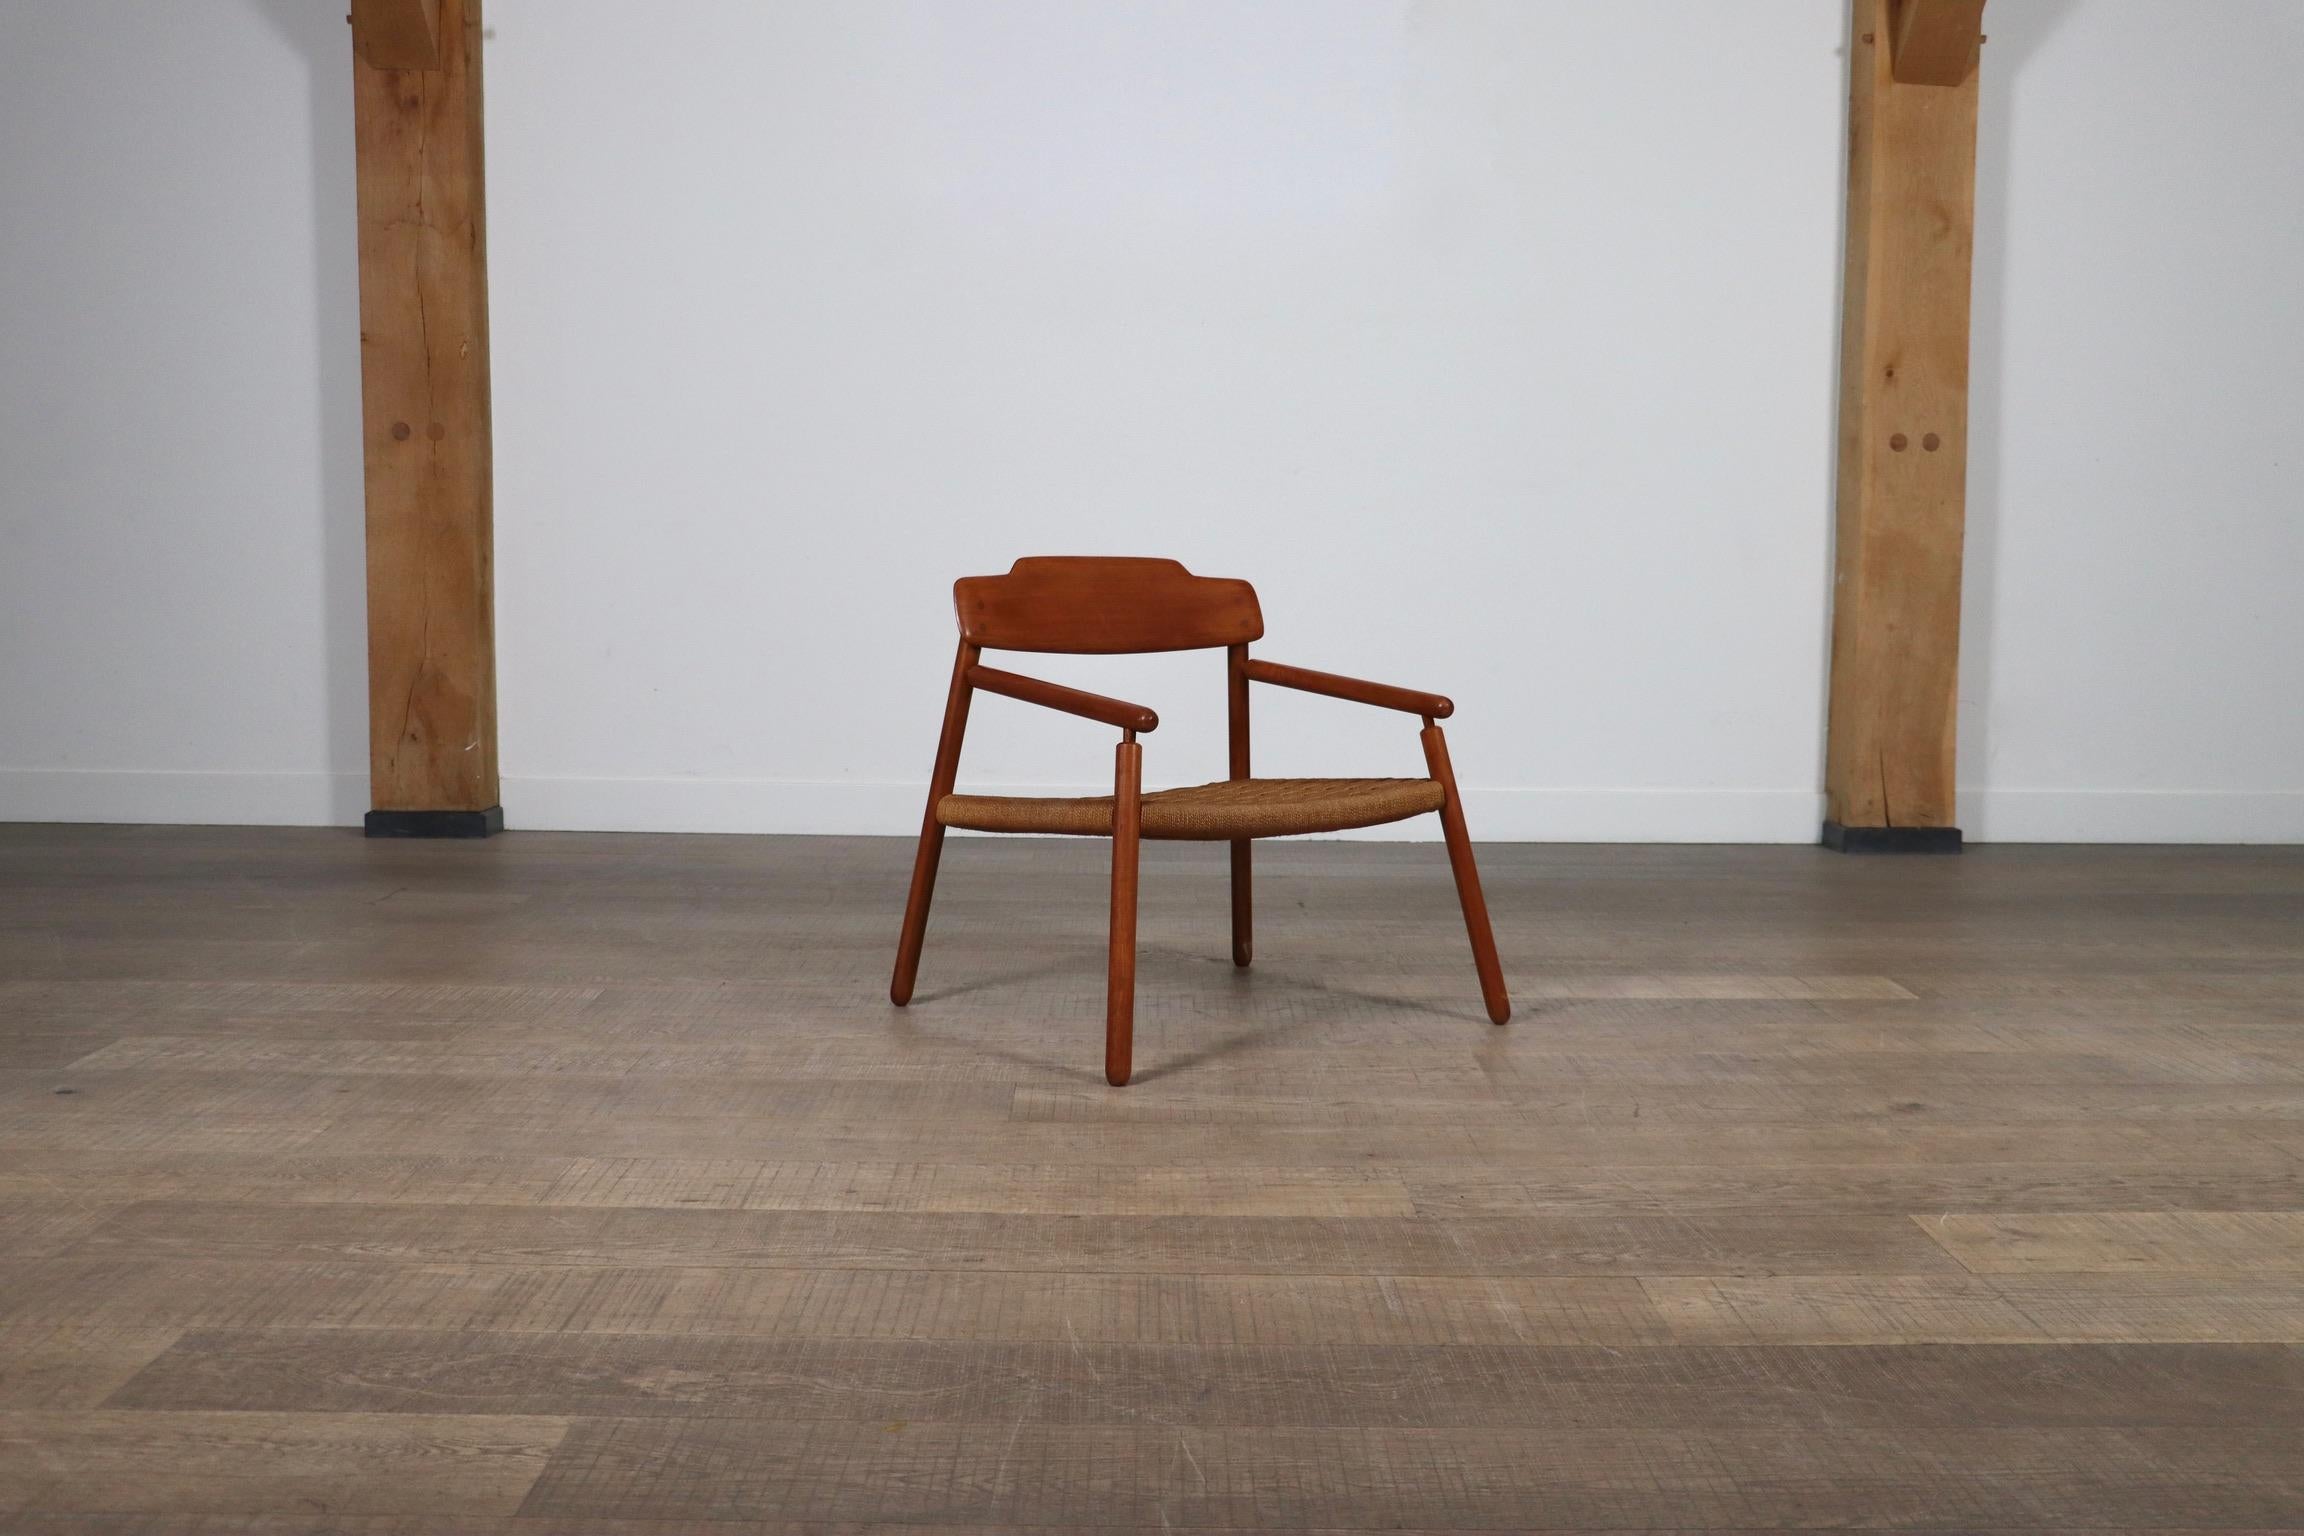 Nice minimalistic midcentury modern easy chair in oak and woven papercord made in Finland in the 1950s. This airy design is made with great eye for details. The wooden connections, or joints, of the frame are all neatly connected to be a part of the